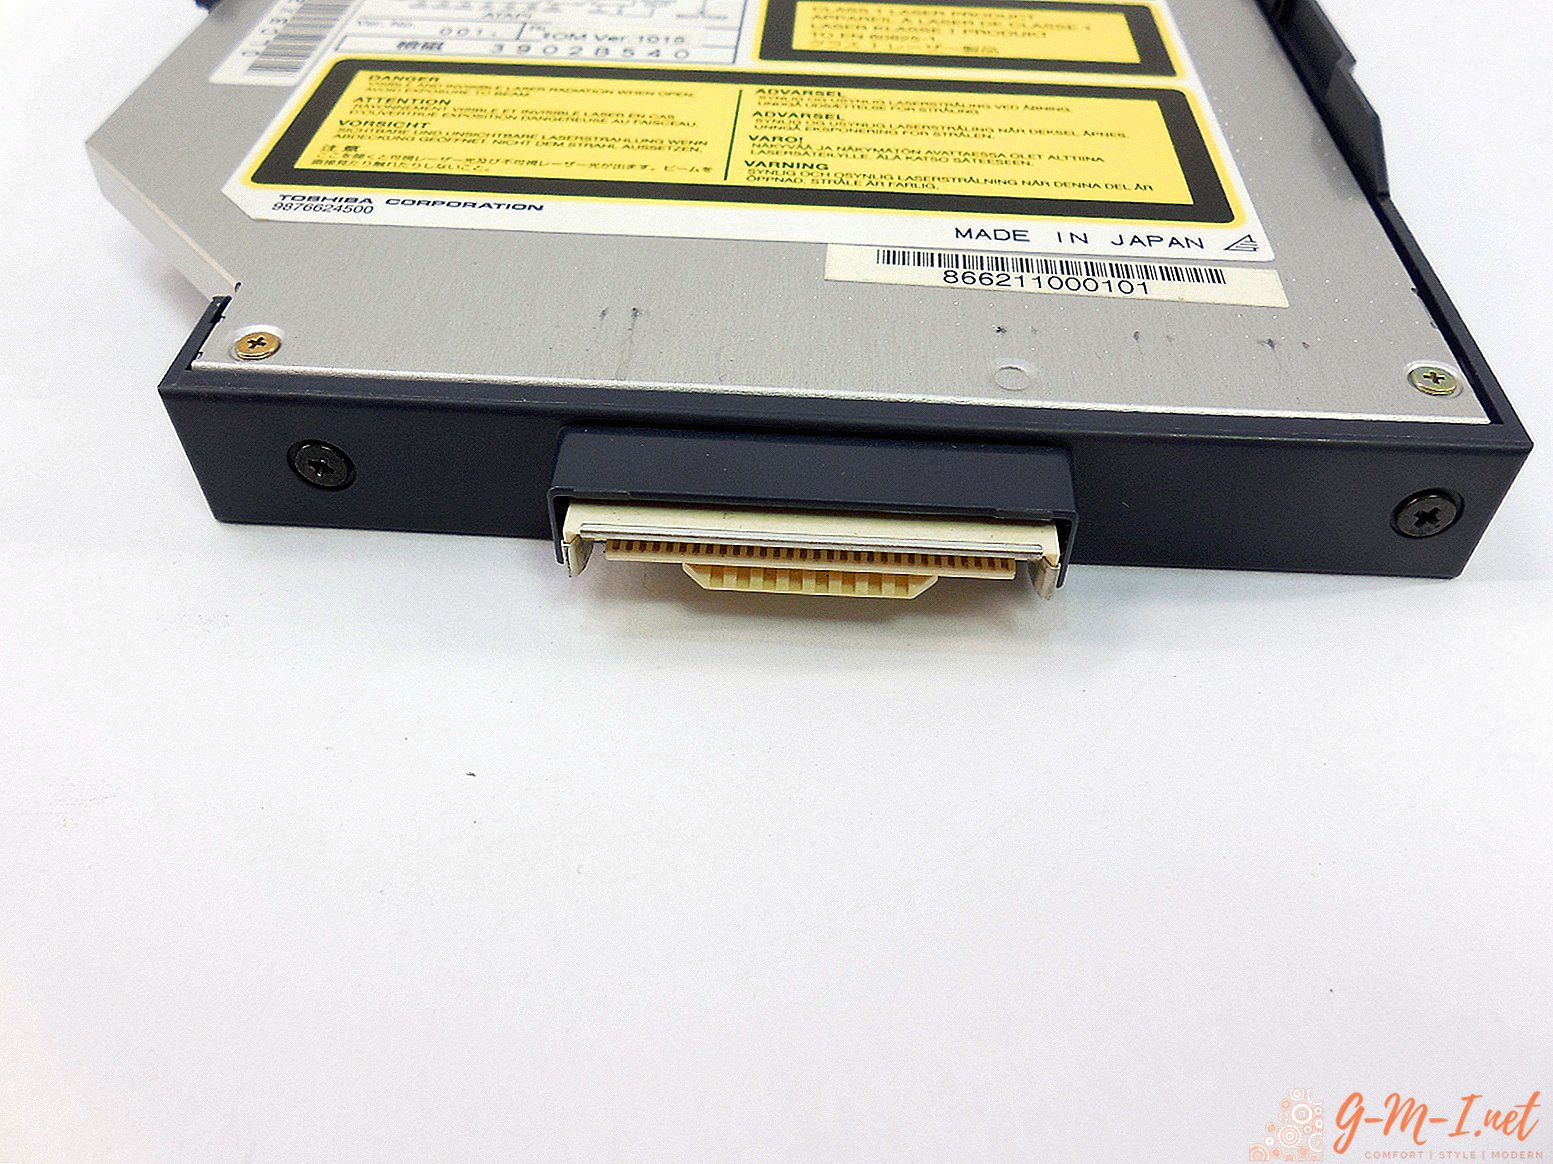 Laptop optical drive: what is it